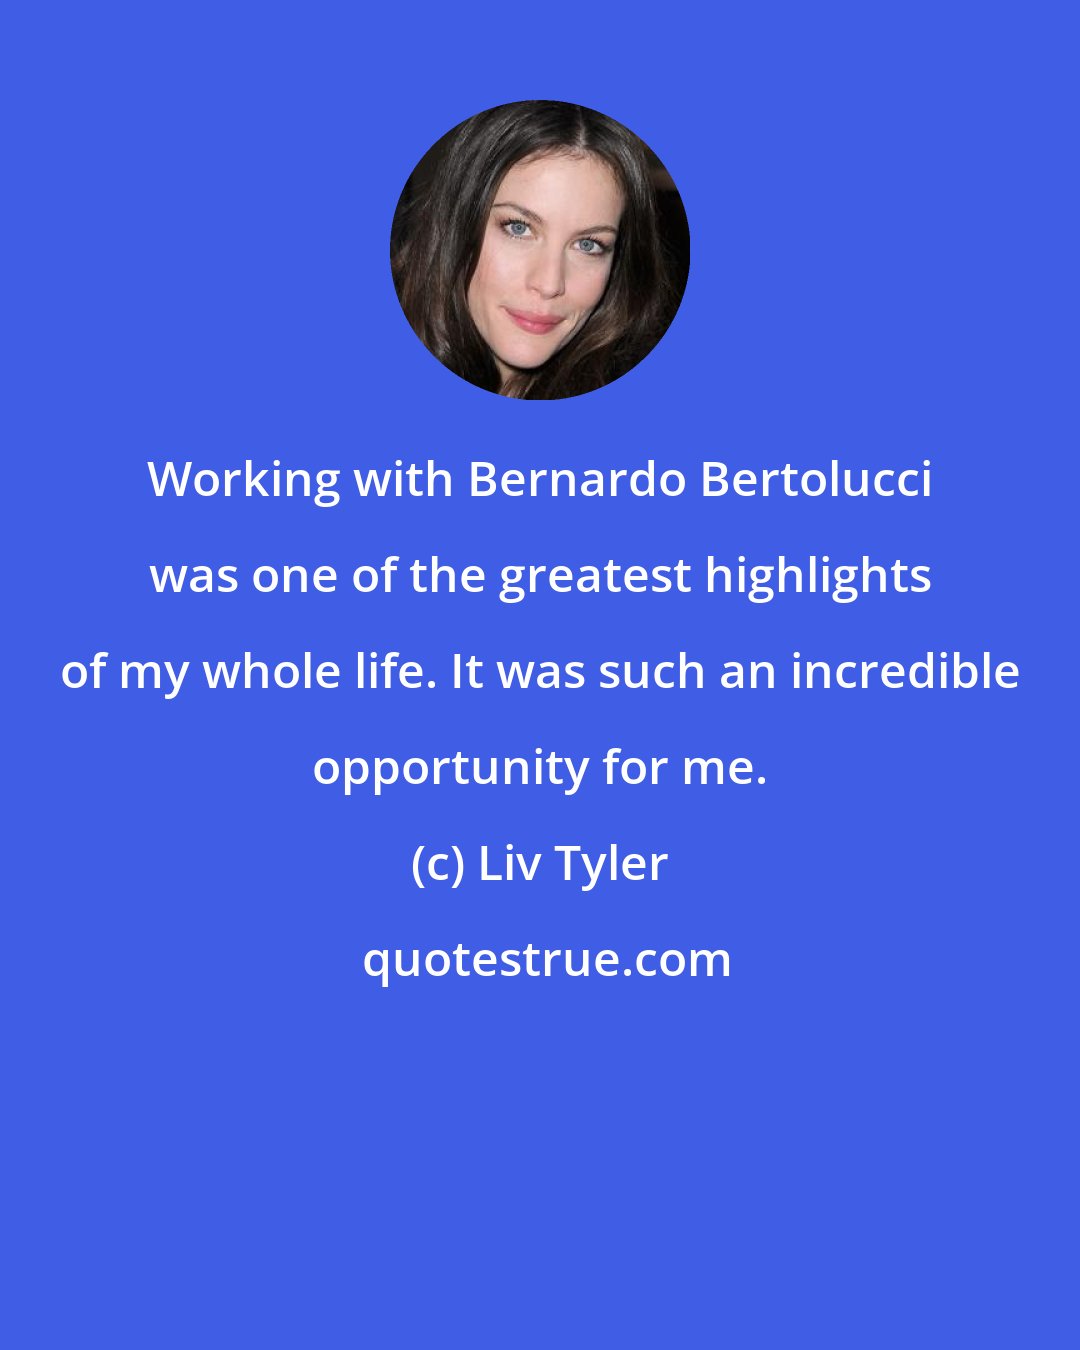 Liv Tyler: Working with Bernardo Bertolucci was one of the greatest highlights of my whole life. It was such an incredible opportunity for me.